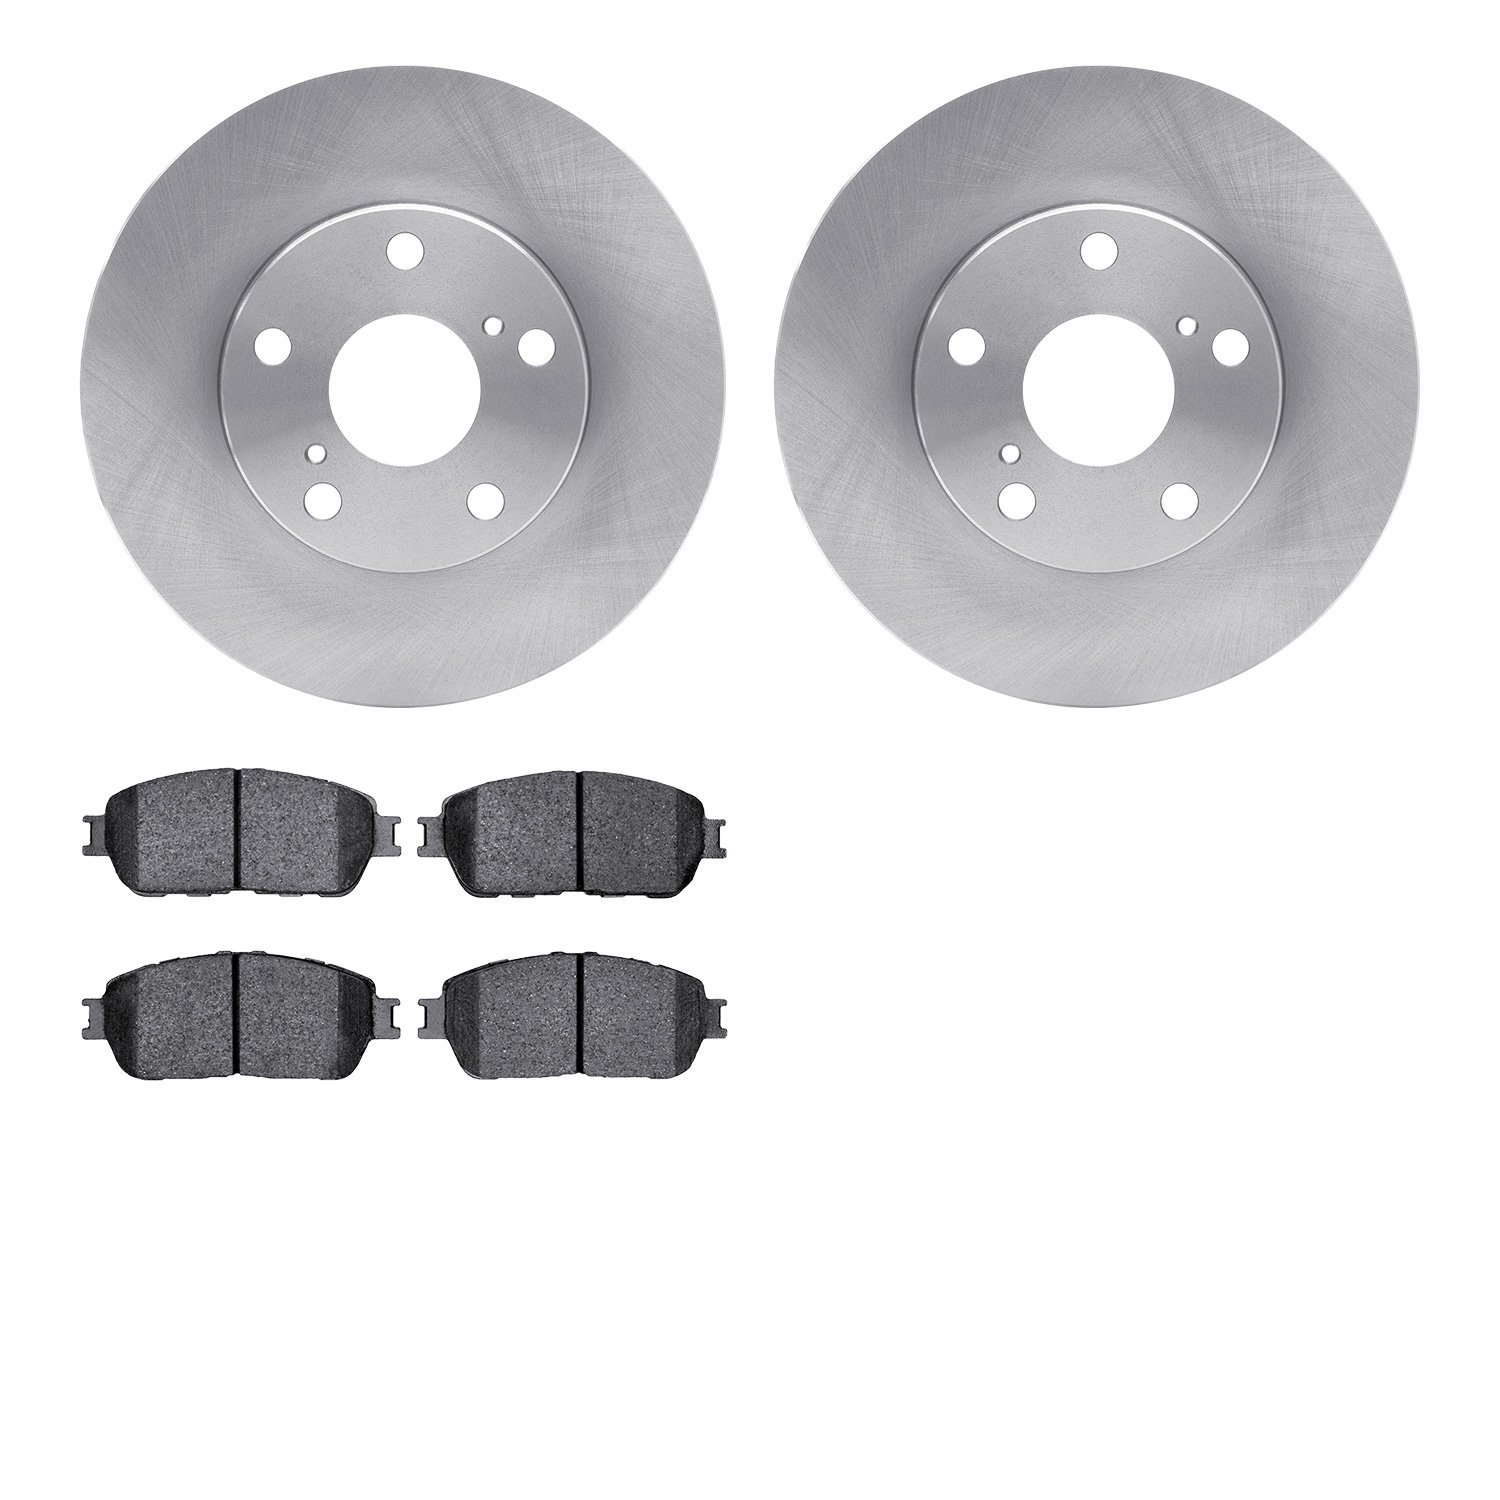 6402-76055 Brake Rotors with Ultimate-Duty Brake Pads, 2005-2015 Lexus/Toyota/Scion, Position: Front